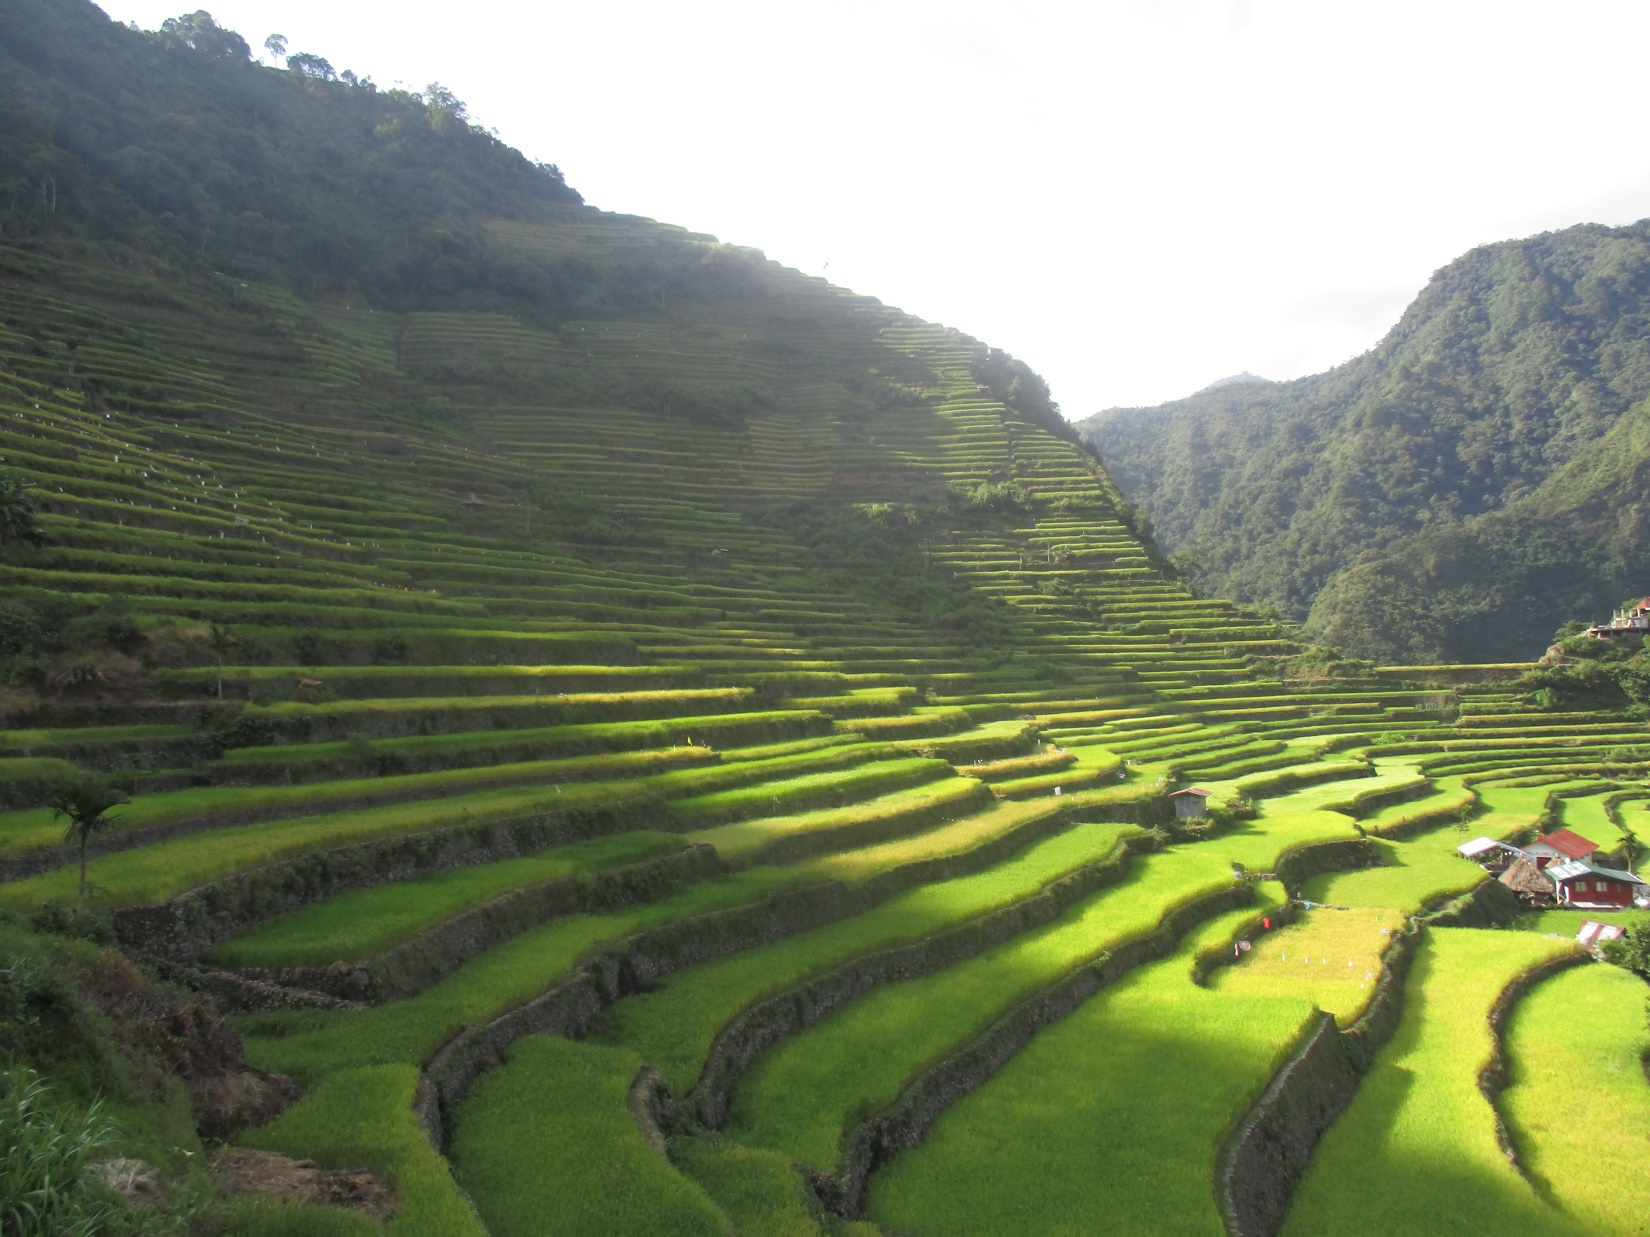 -Life in Tinoc, Ifugao is ver